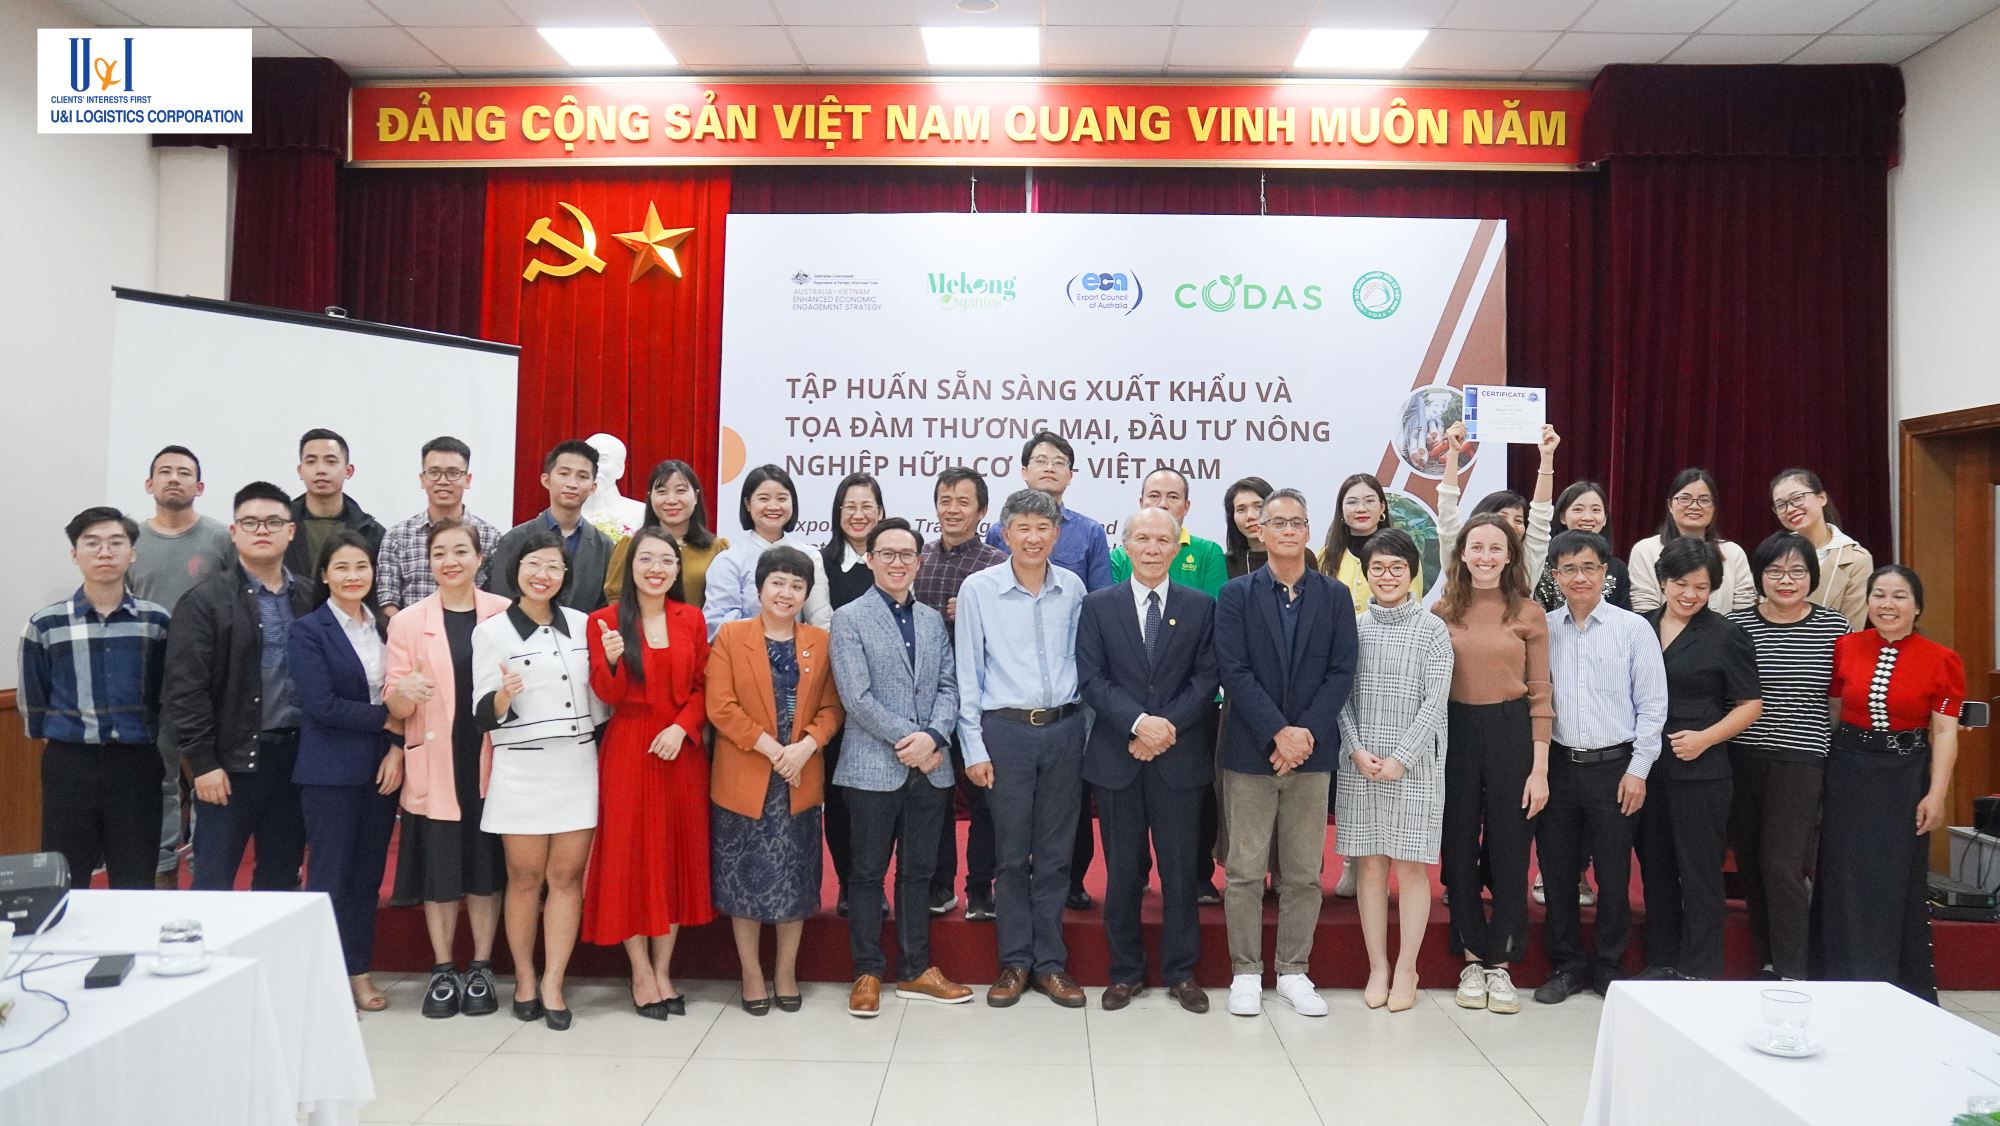 U&I Logistics Accompanies The "Deepening Organic Agriculture Trade And Investment Between Australia And Vietnam" Project 